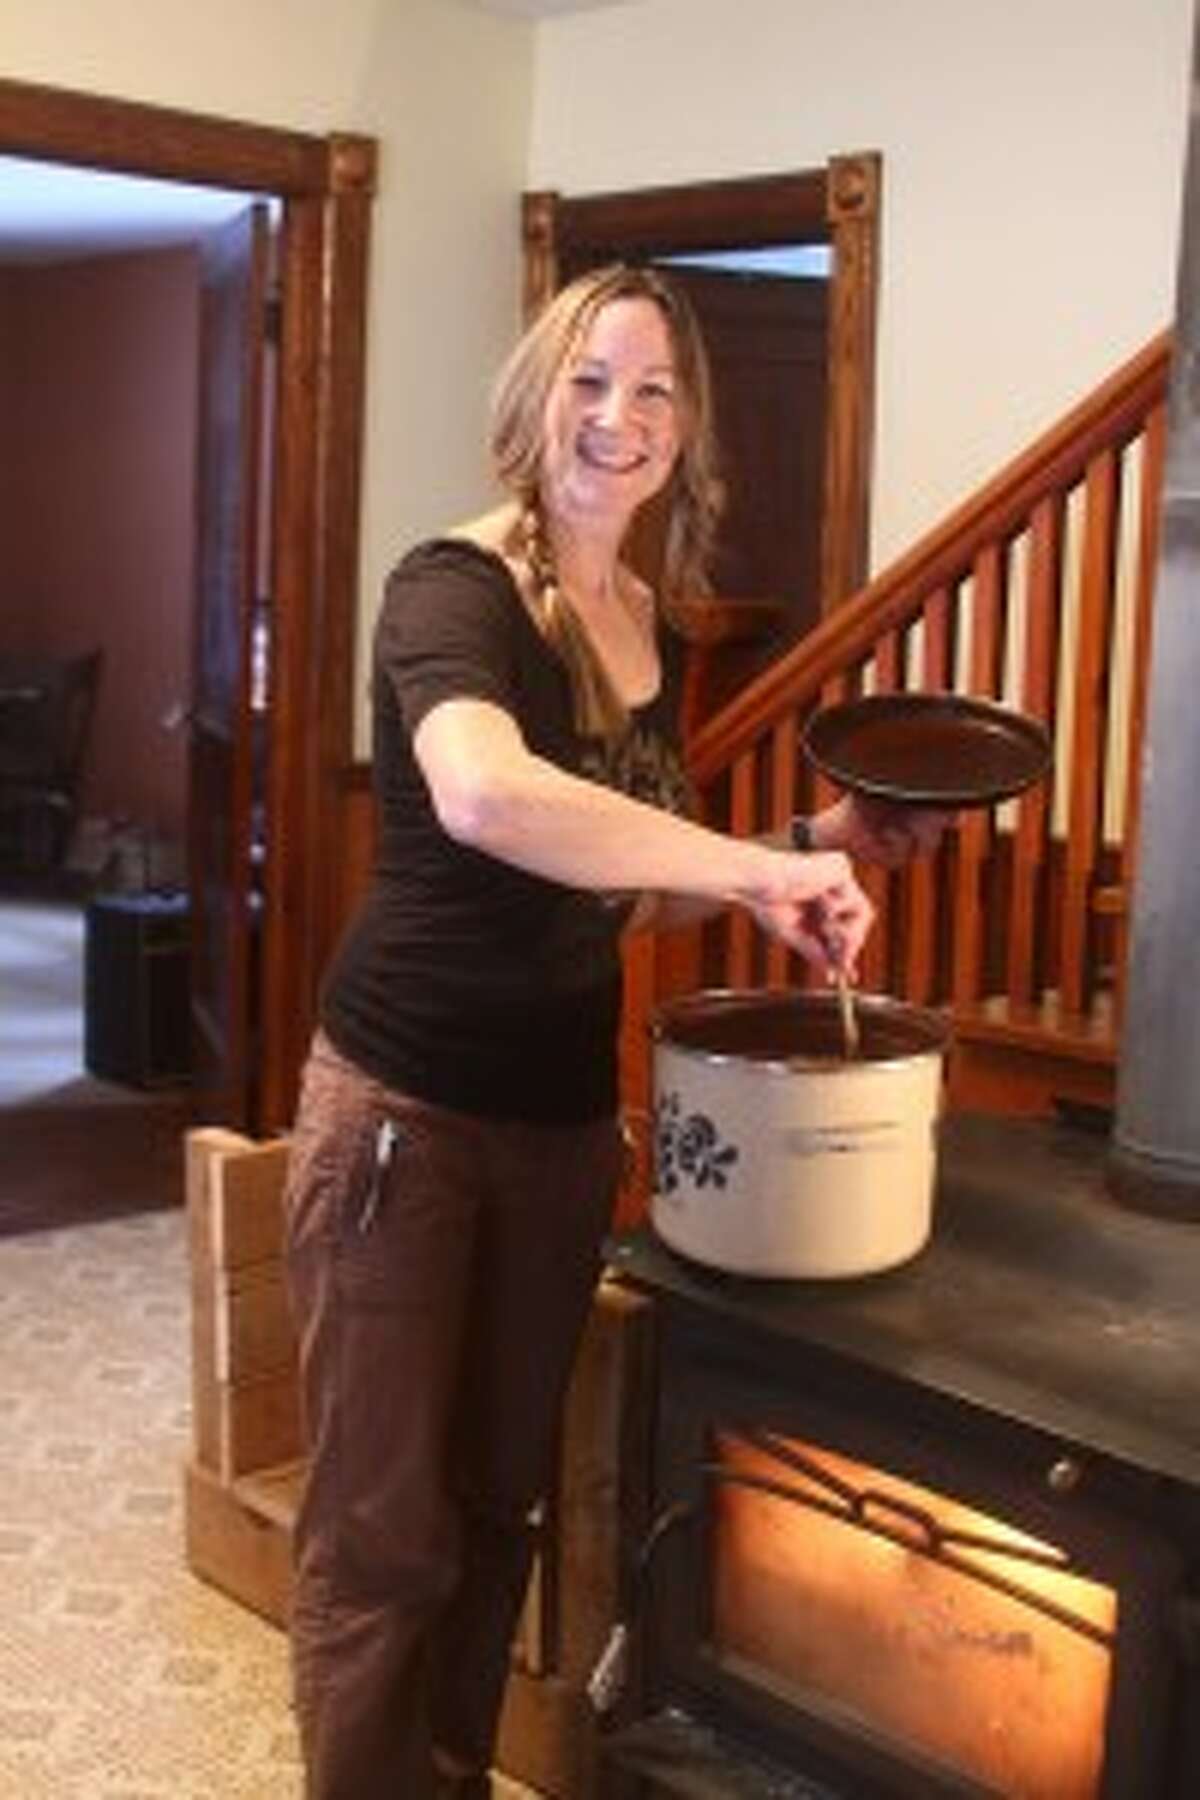 IMMERING: Brooke Whipple stirs a pot of borscht soup on top of her wood stove in her home. “It’s definitely a winter soup and the nice things once it’s all together, I can put in the Crock Pot or on the wood stove and just let it simmer all day,” Whipple said.